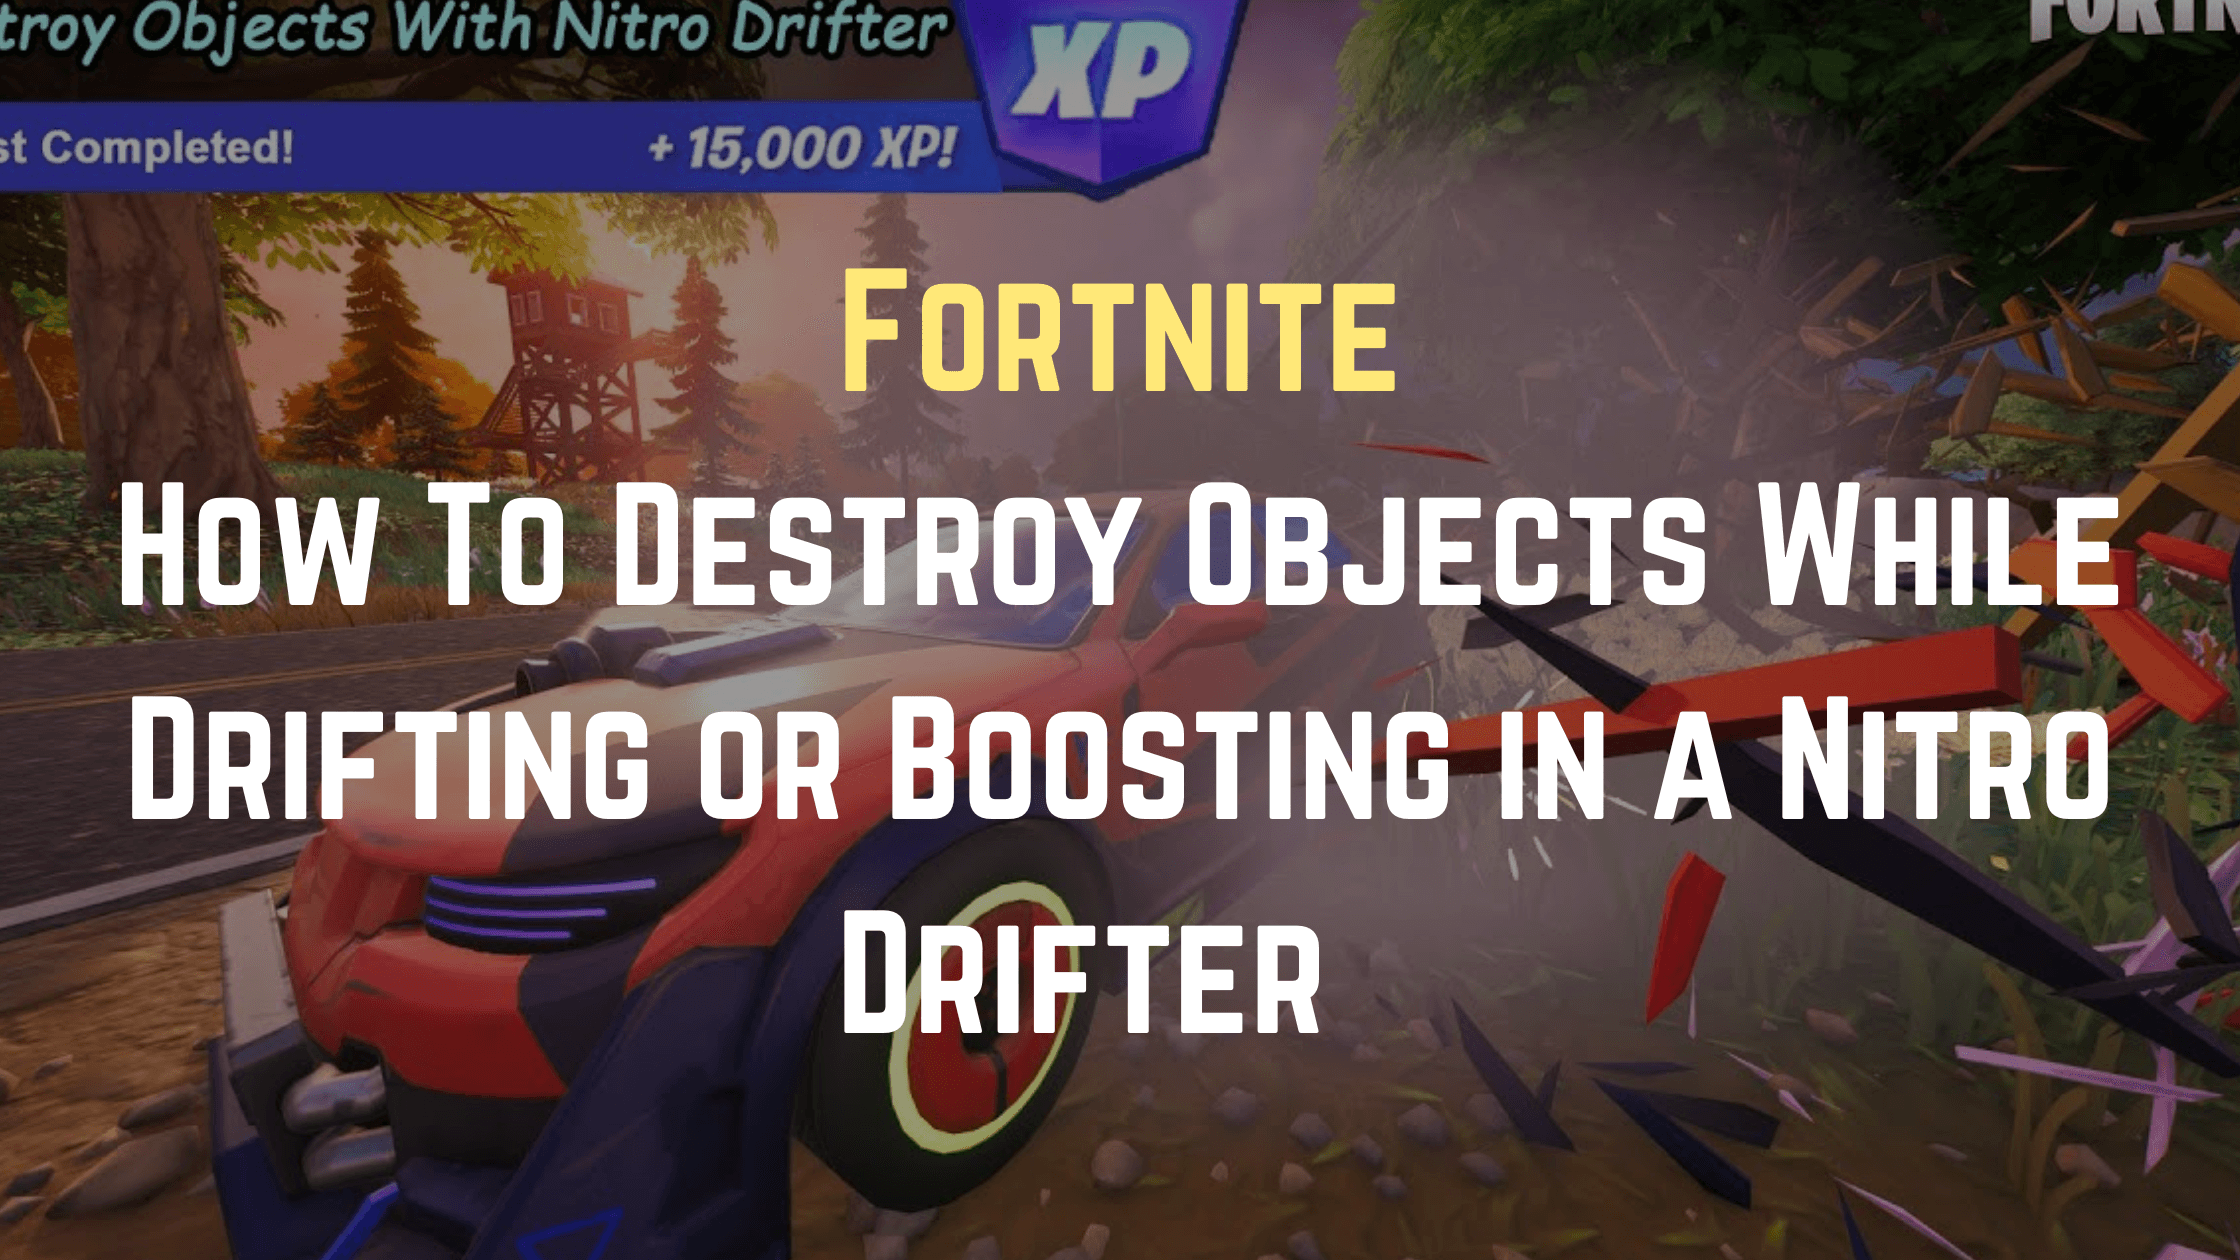 Destroy objects while drifting or boosting in a nitro